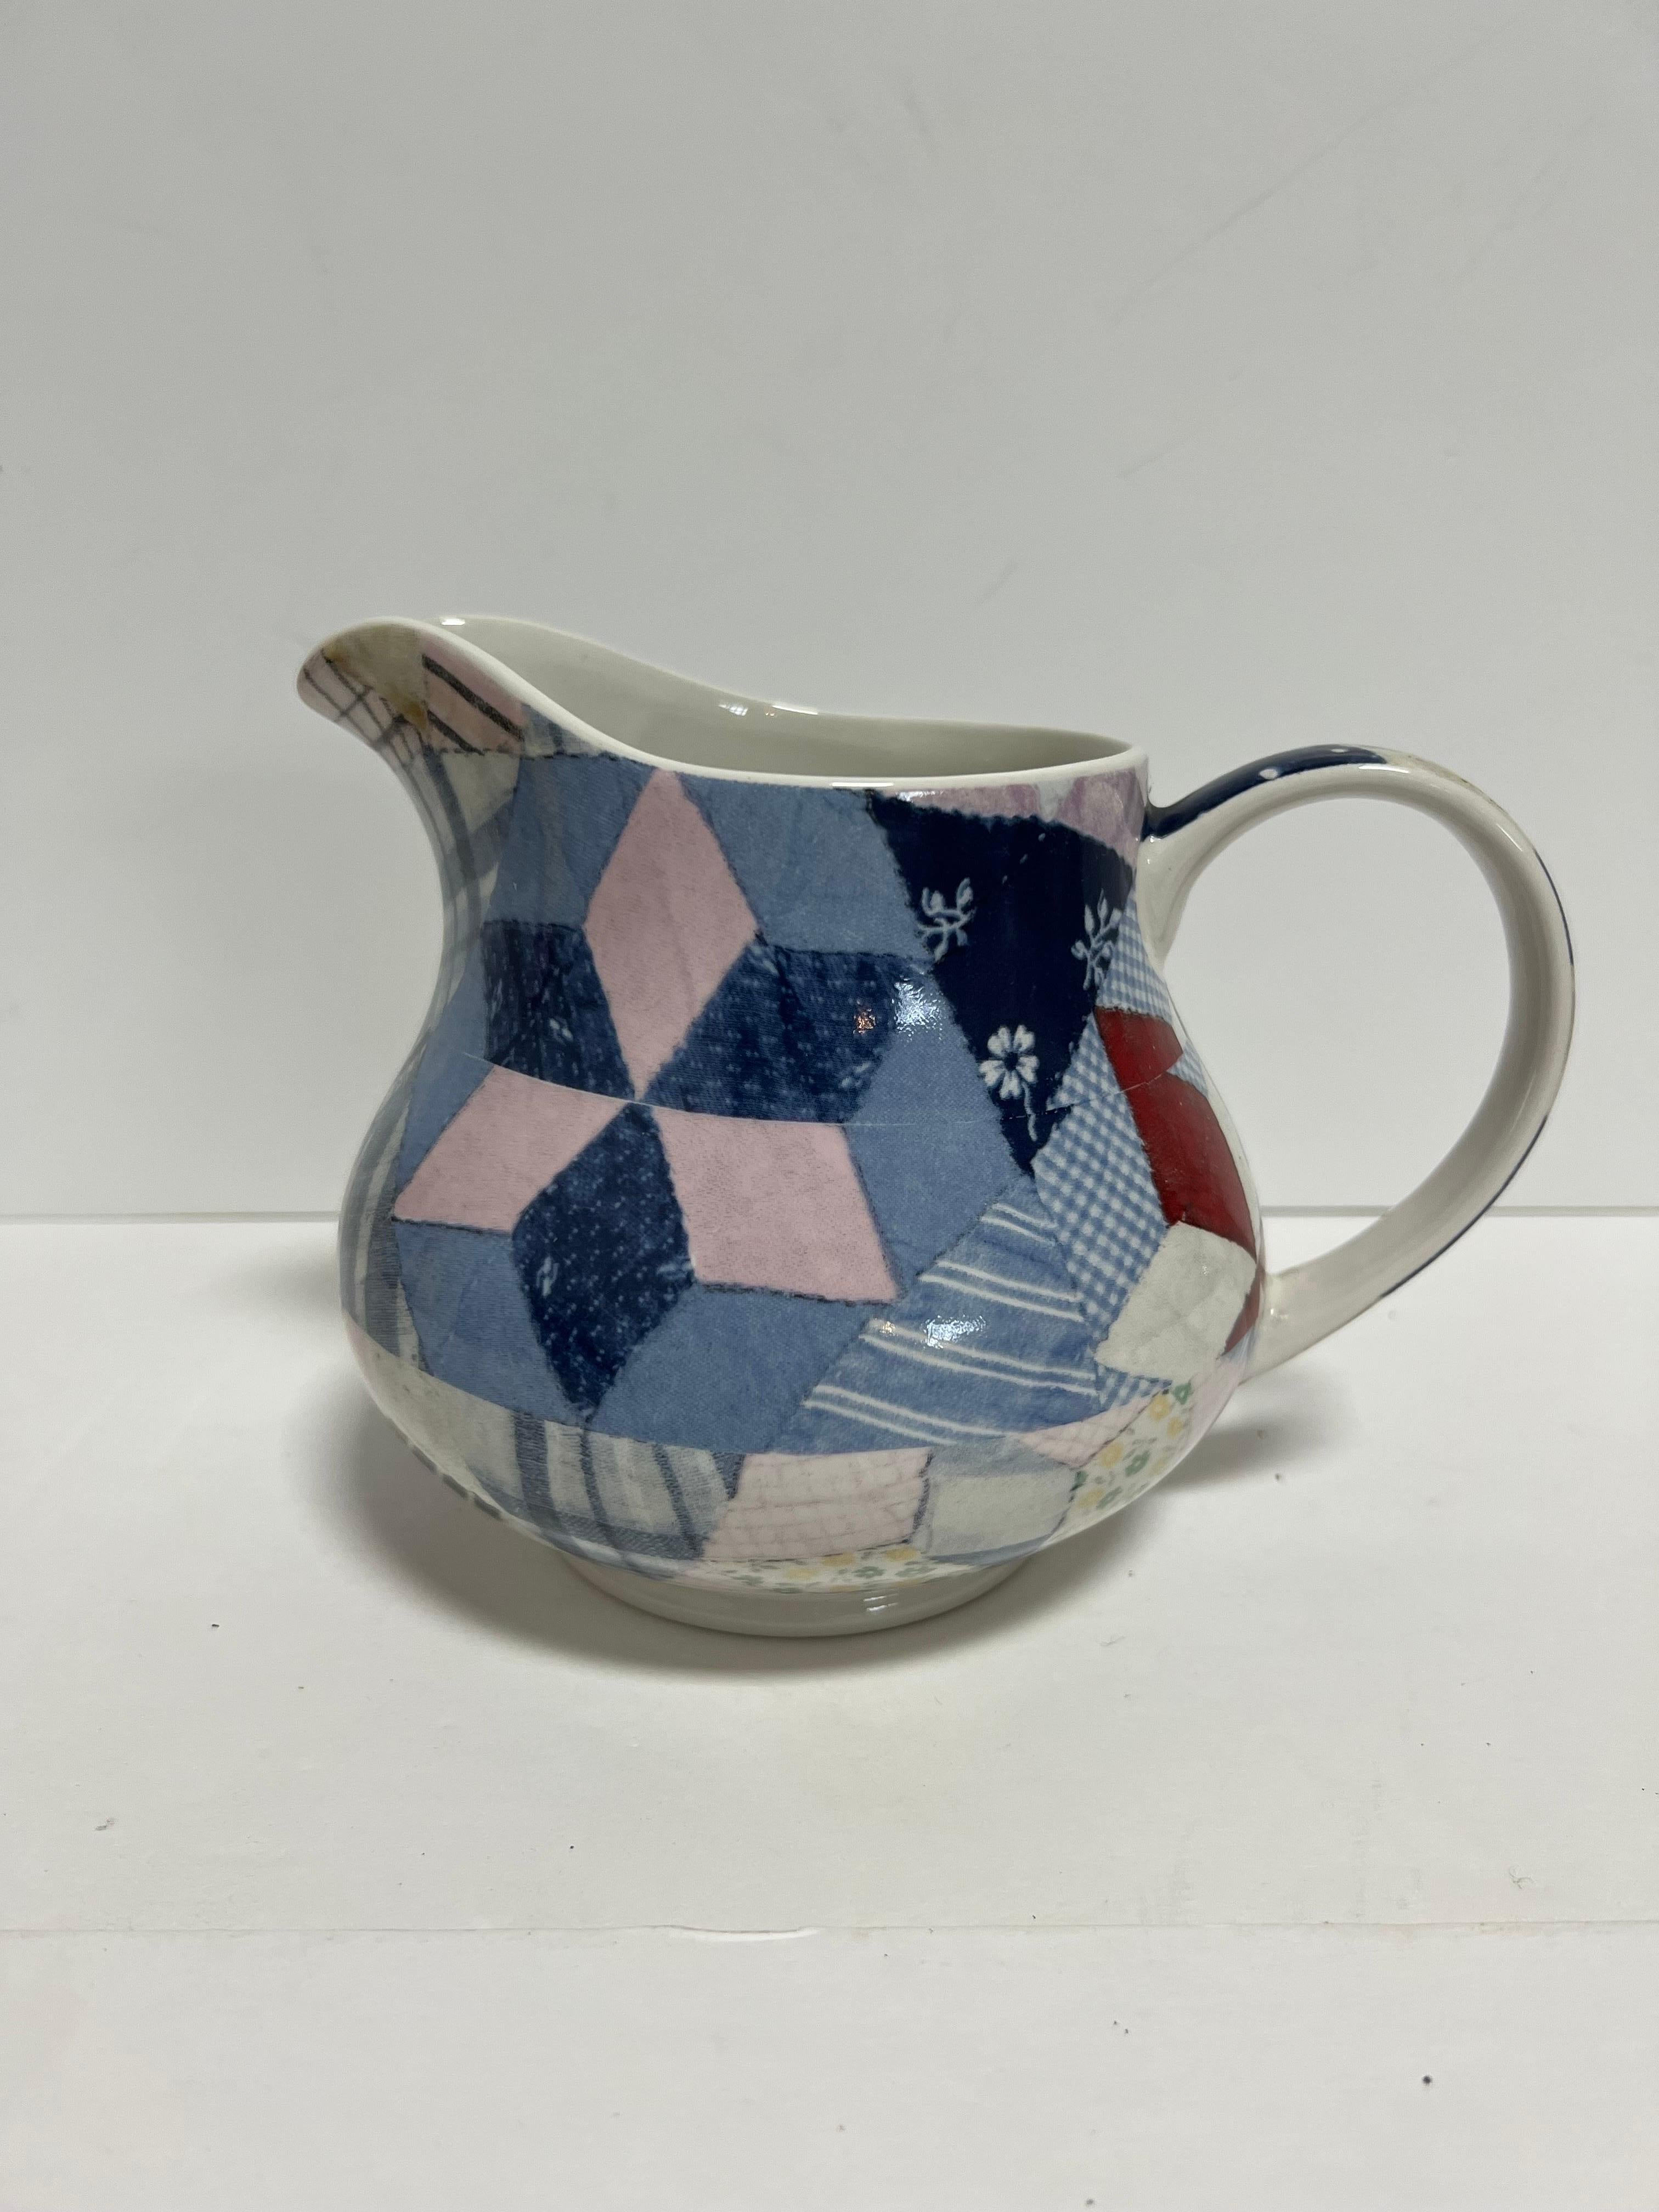 A medium sized 32 ounce pitcher by Wedgwood for Ralph Lauren Home in the Patchwork pattern.

Features a design inspired by antique Americana quilts.

Currently out of production. Originally produced from 1989 to 1993. 

Made in